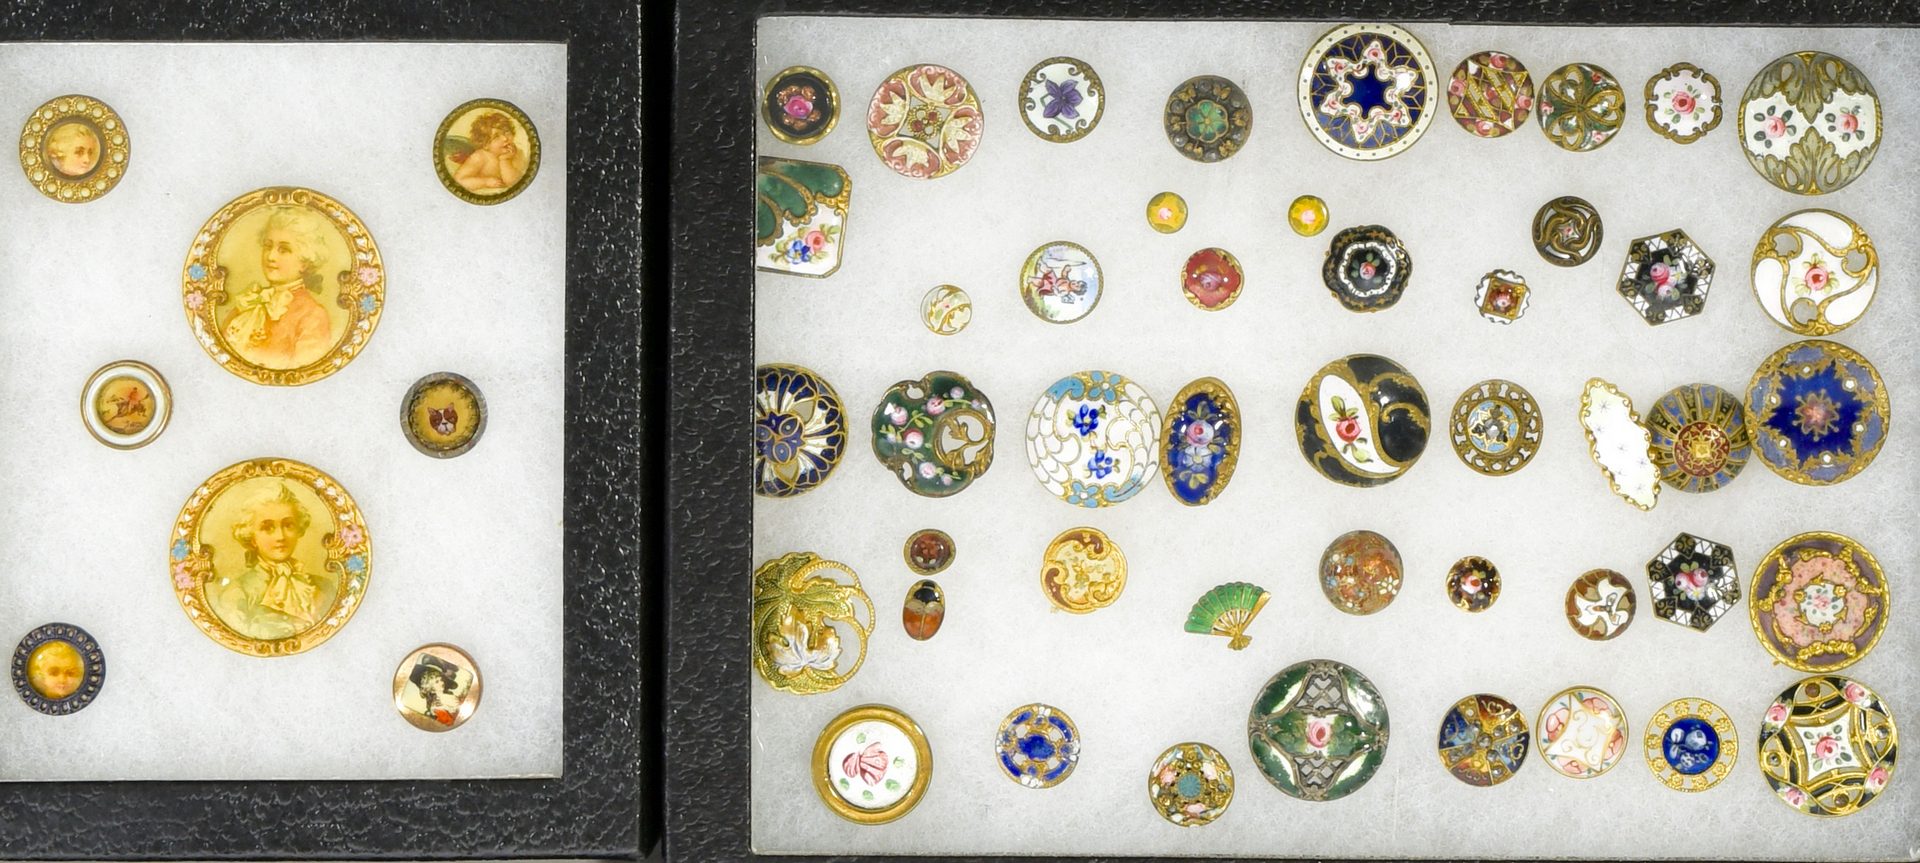 Lot 917: Extensive Button Collection w/ Books